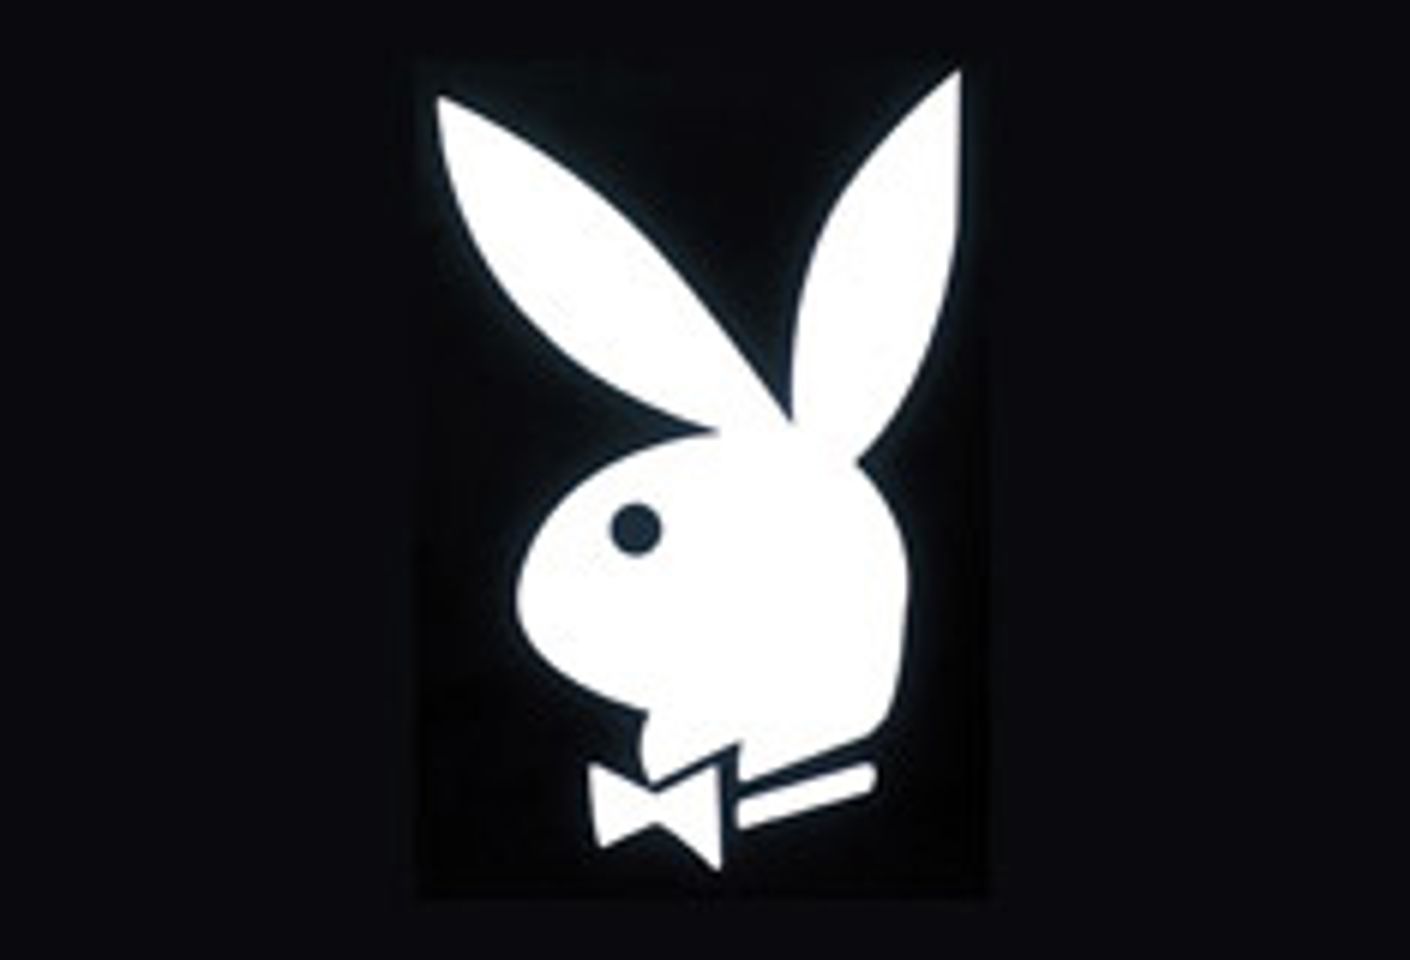 Playboy Stock Rises in 2nd Quarter